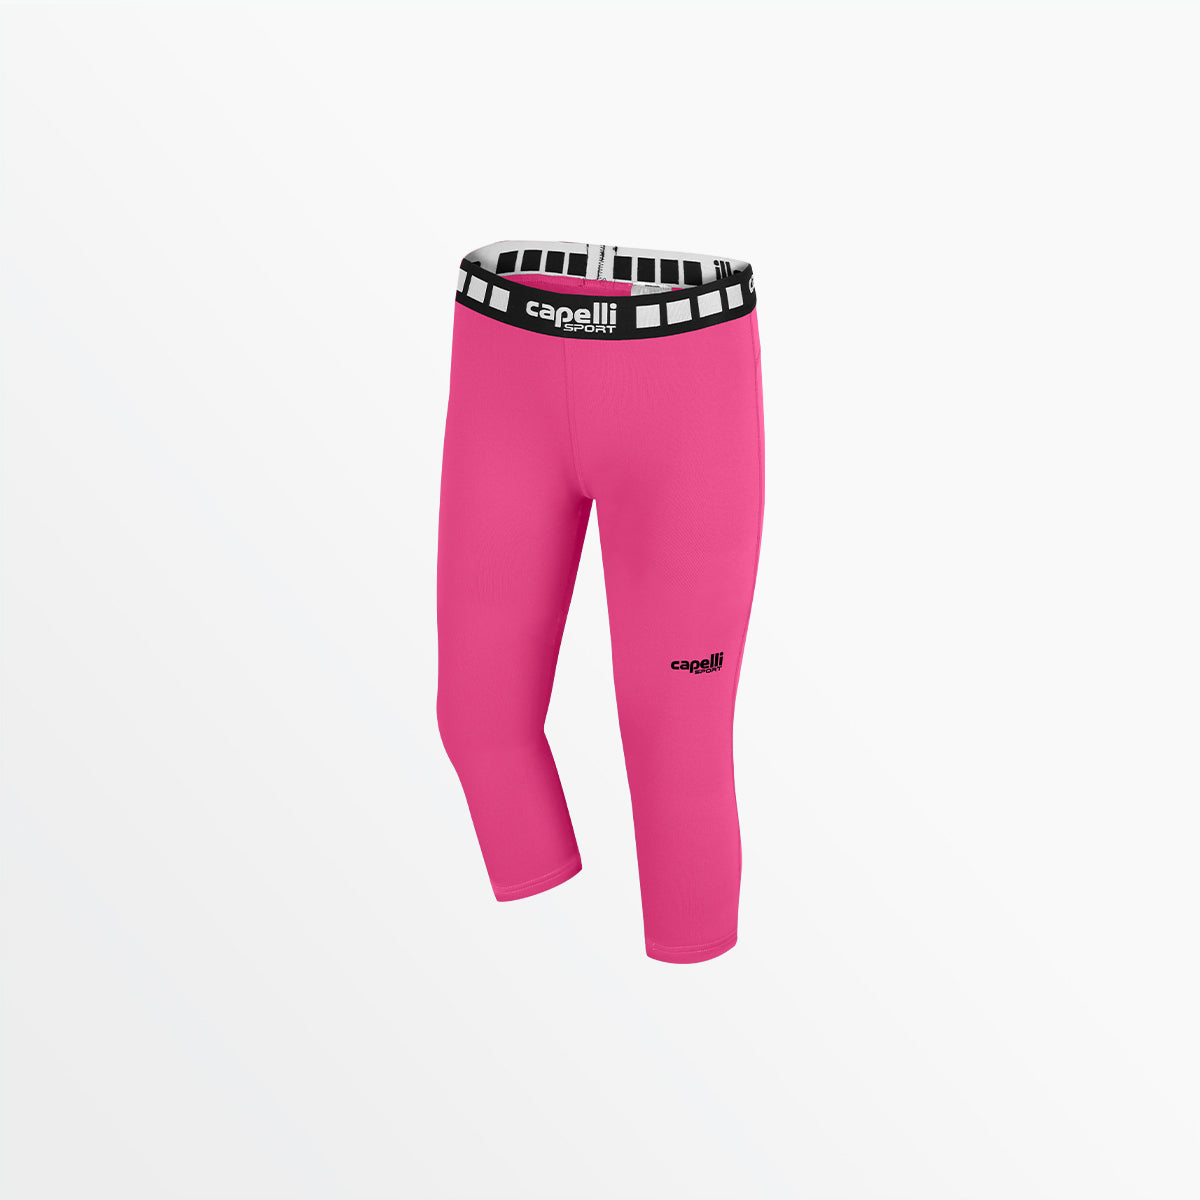 GIRL'S 3/4 PERFORMANCE TIGHTS